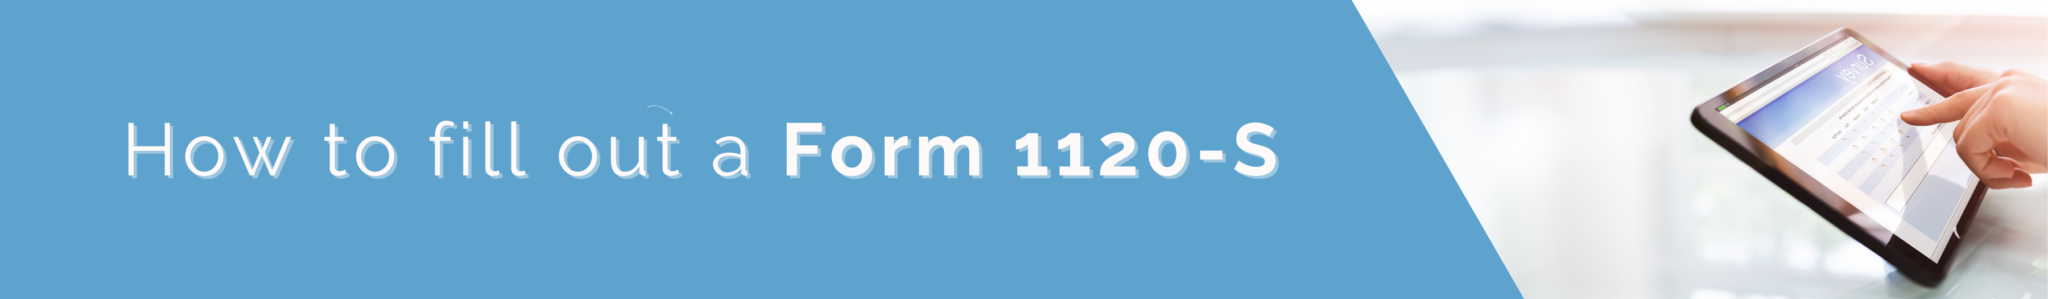 How to fill out a Form 1120-S